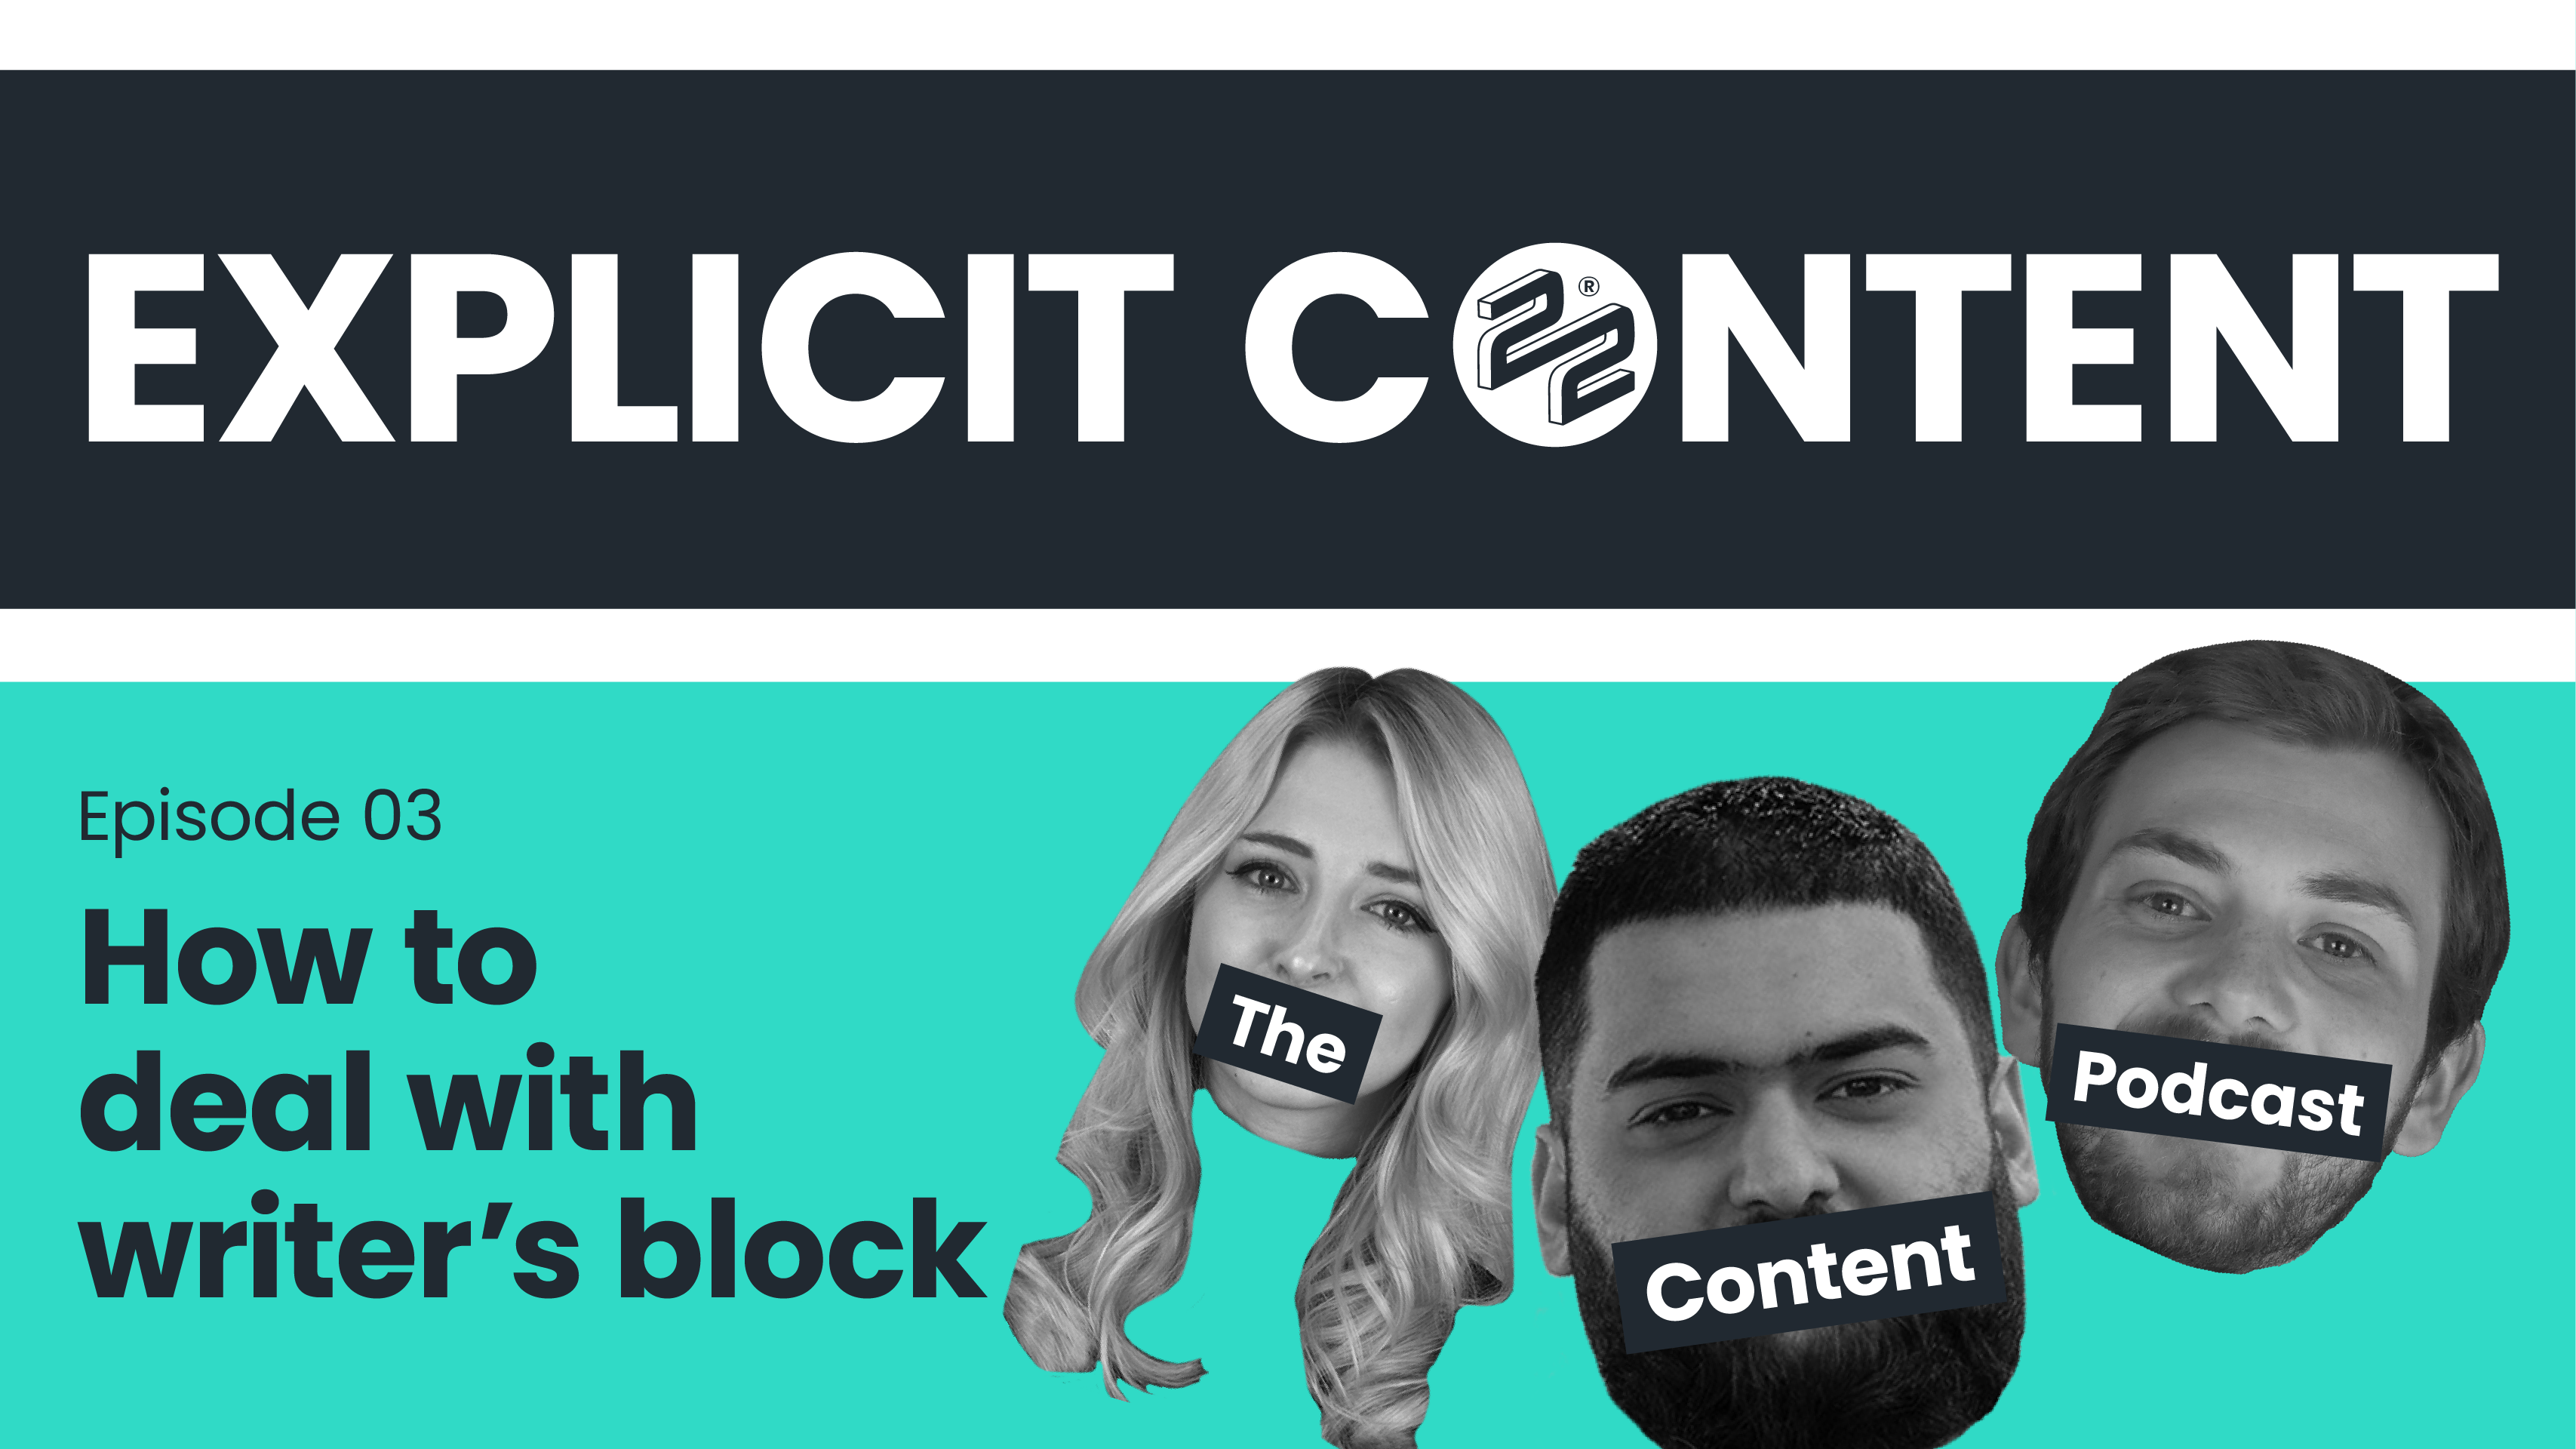 EXPLICIT CONTENT: How to deal with writer's block